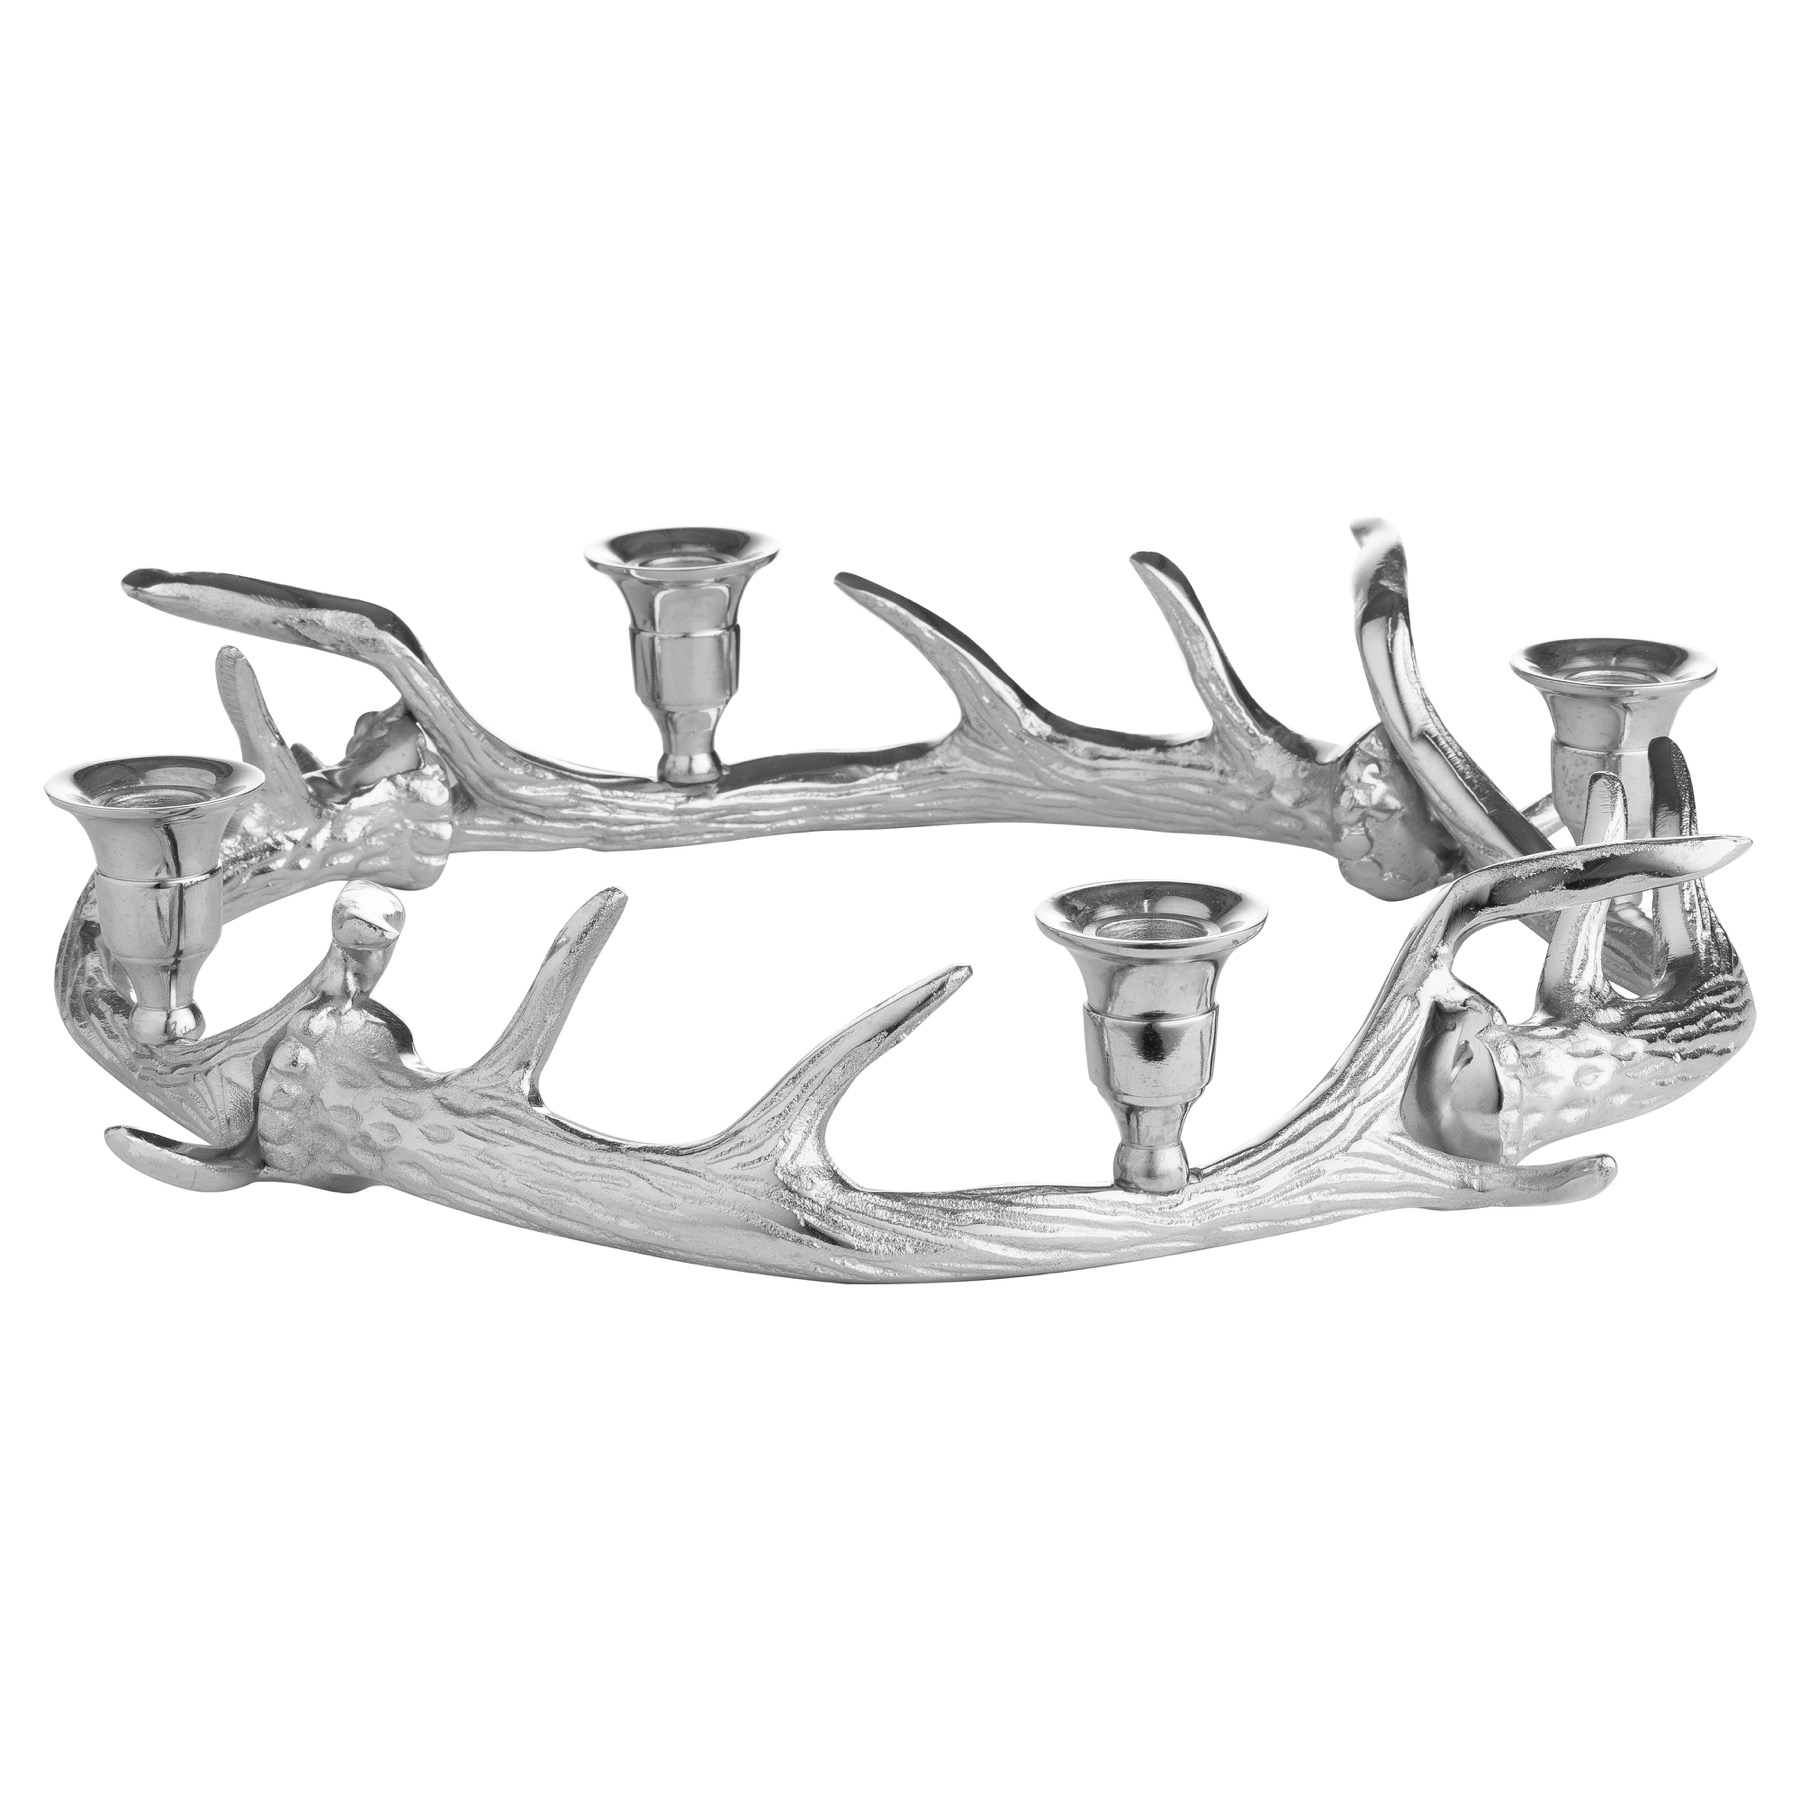 Silver Nickel Circular Antler Candelabra With Four Candle Ho - Image 1